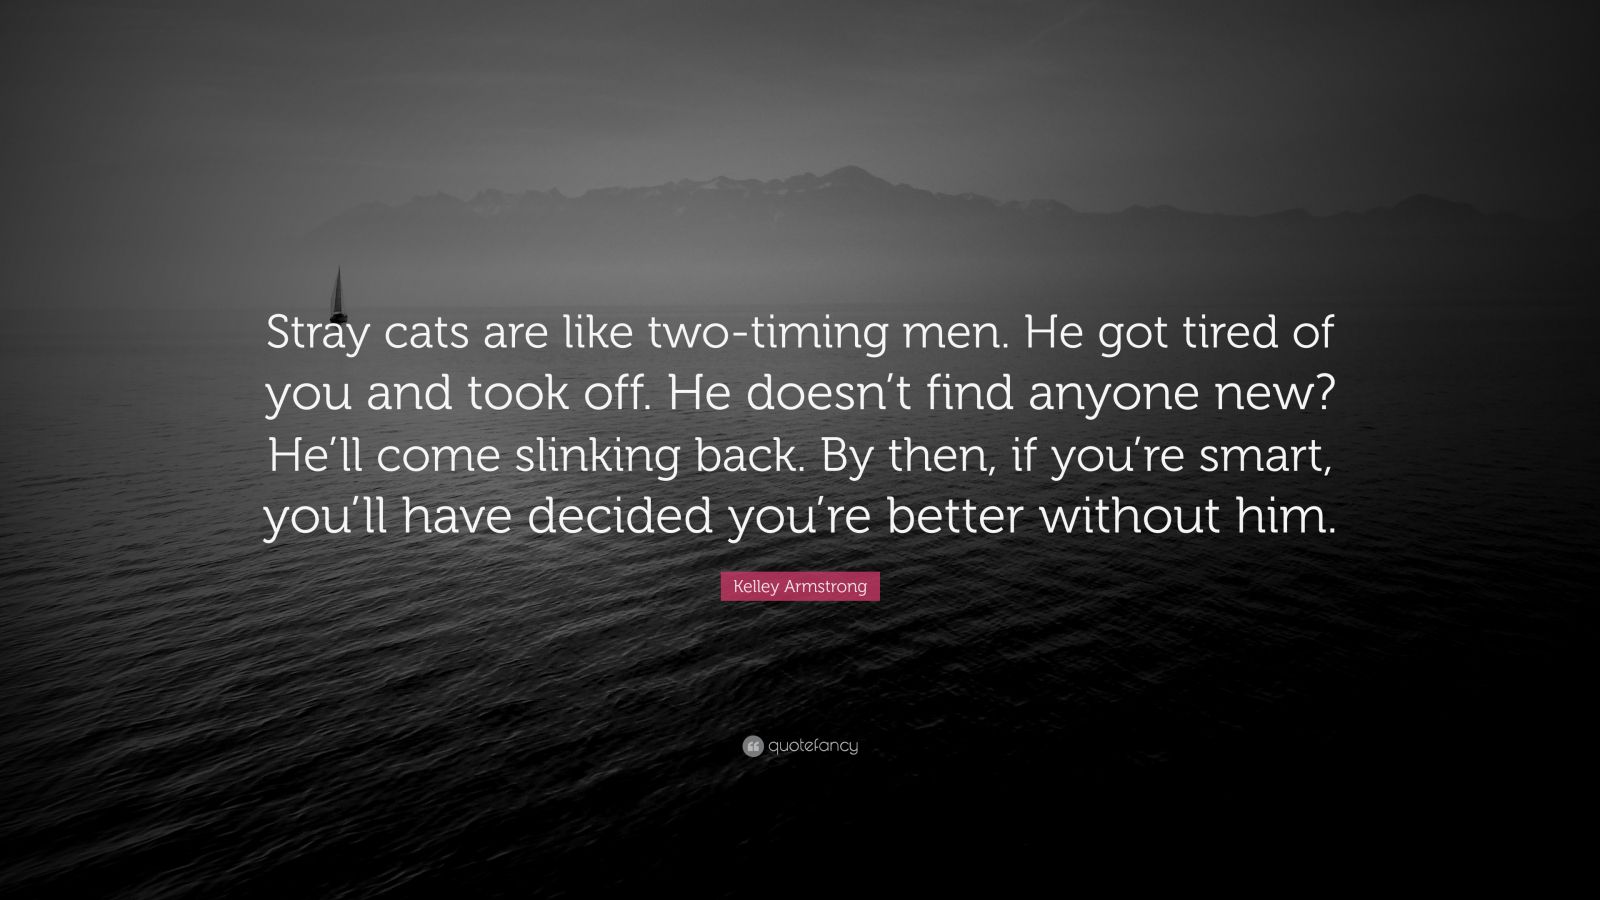 https://quotefancy.com/media/wallpaper/1600x900/6589674-Kelley-Armstrong-Quote-Stray-cats-are-like-two-timing-men-He-got.jpg